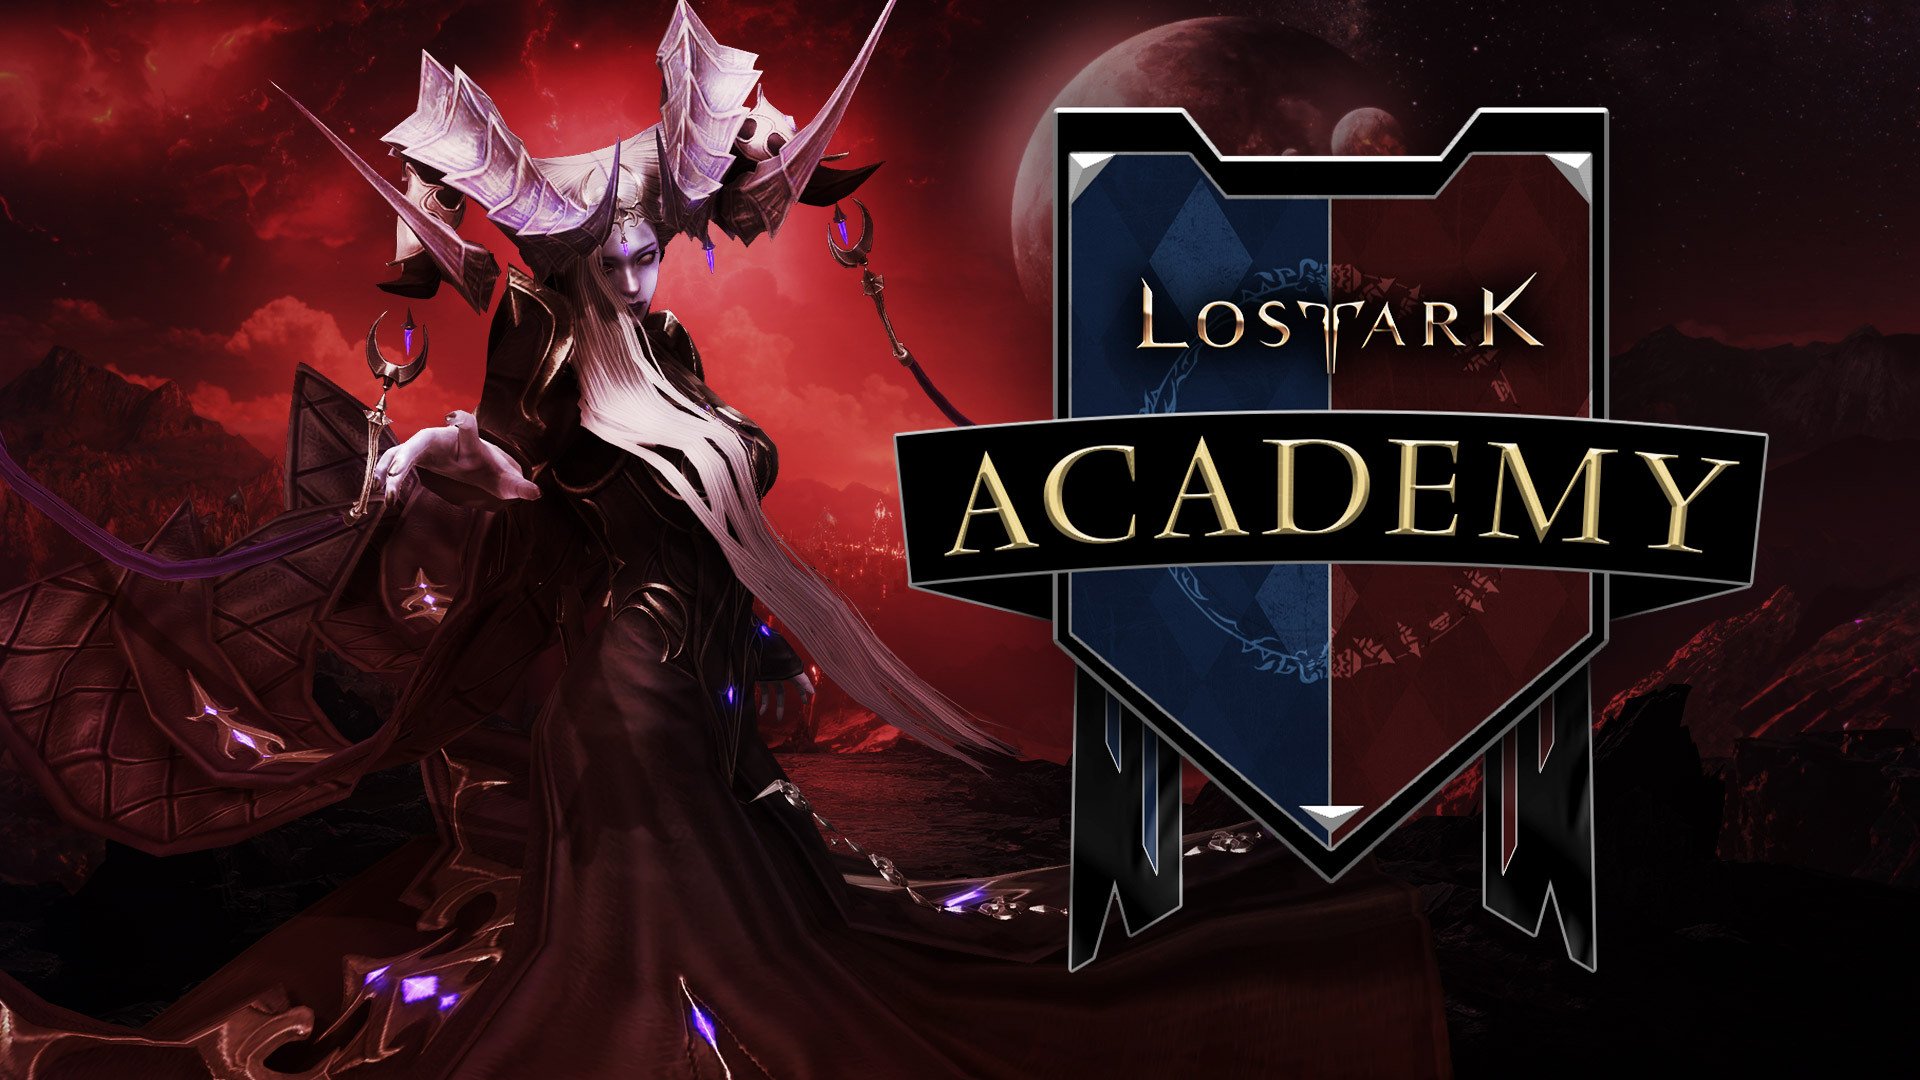 Saintone on X: There were a few awesome updates in #LostArk KR